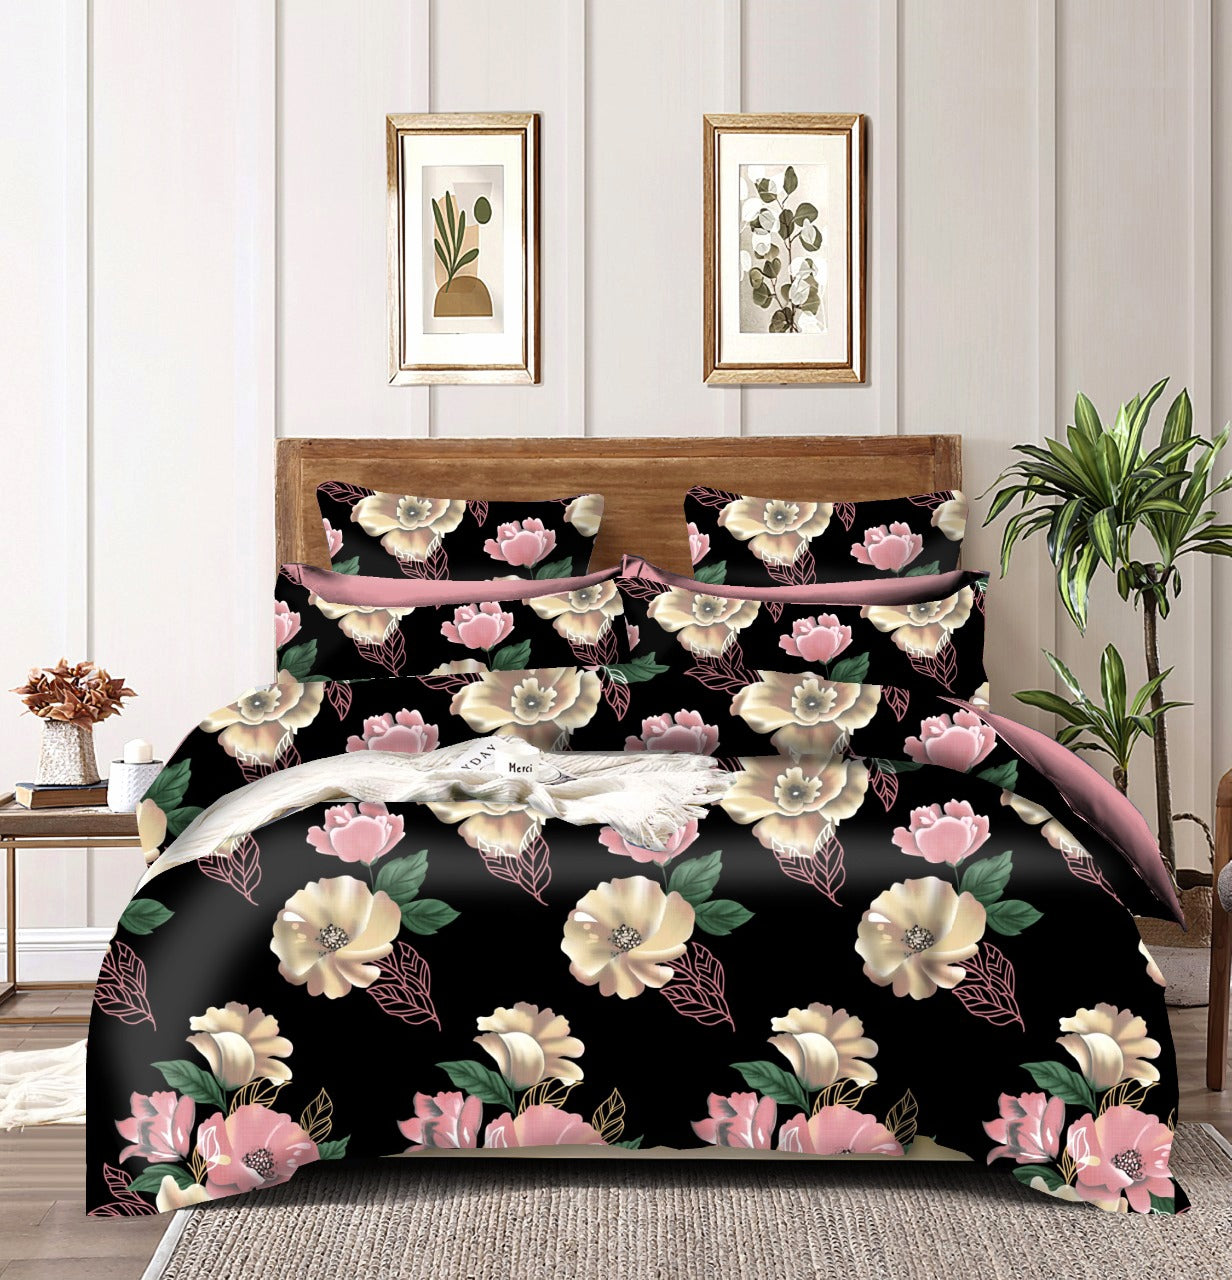 New Black Golden Flower Fitted Cotton Bed Sheet Design with Pillowcases